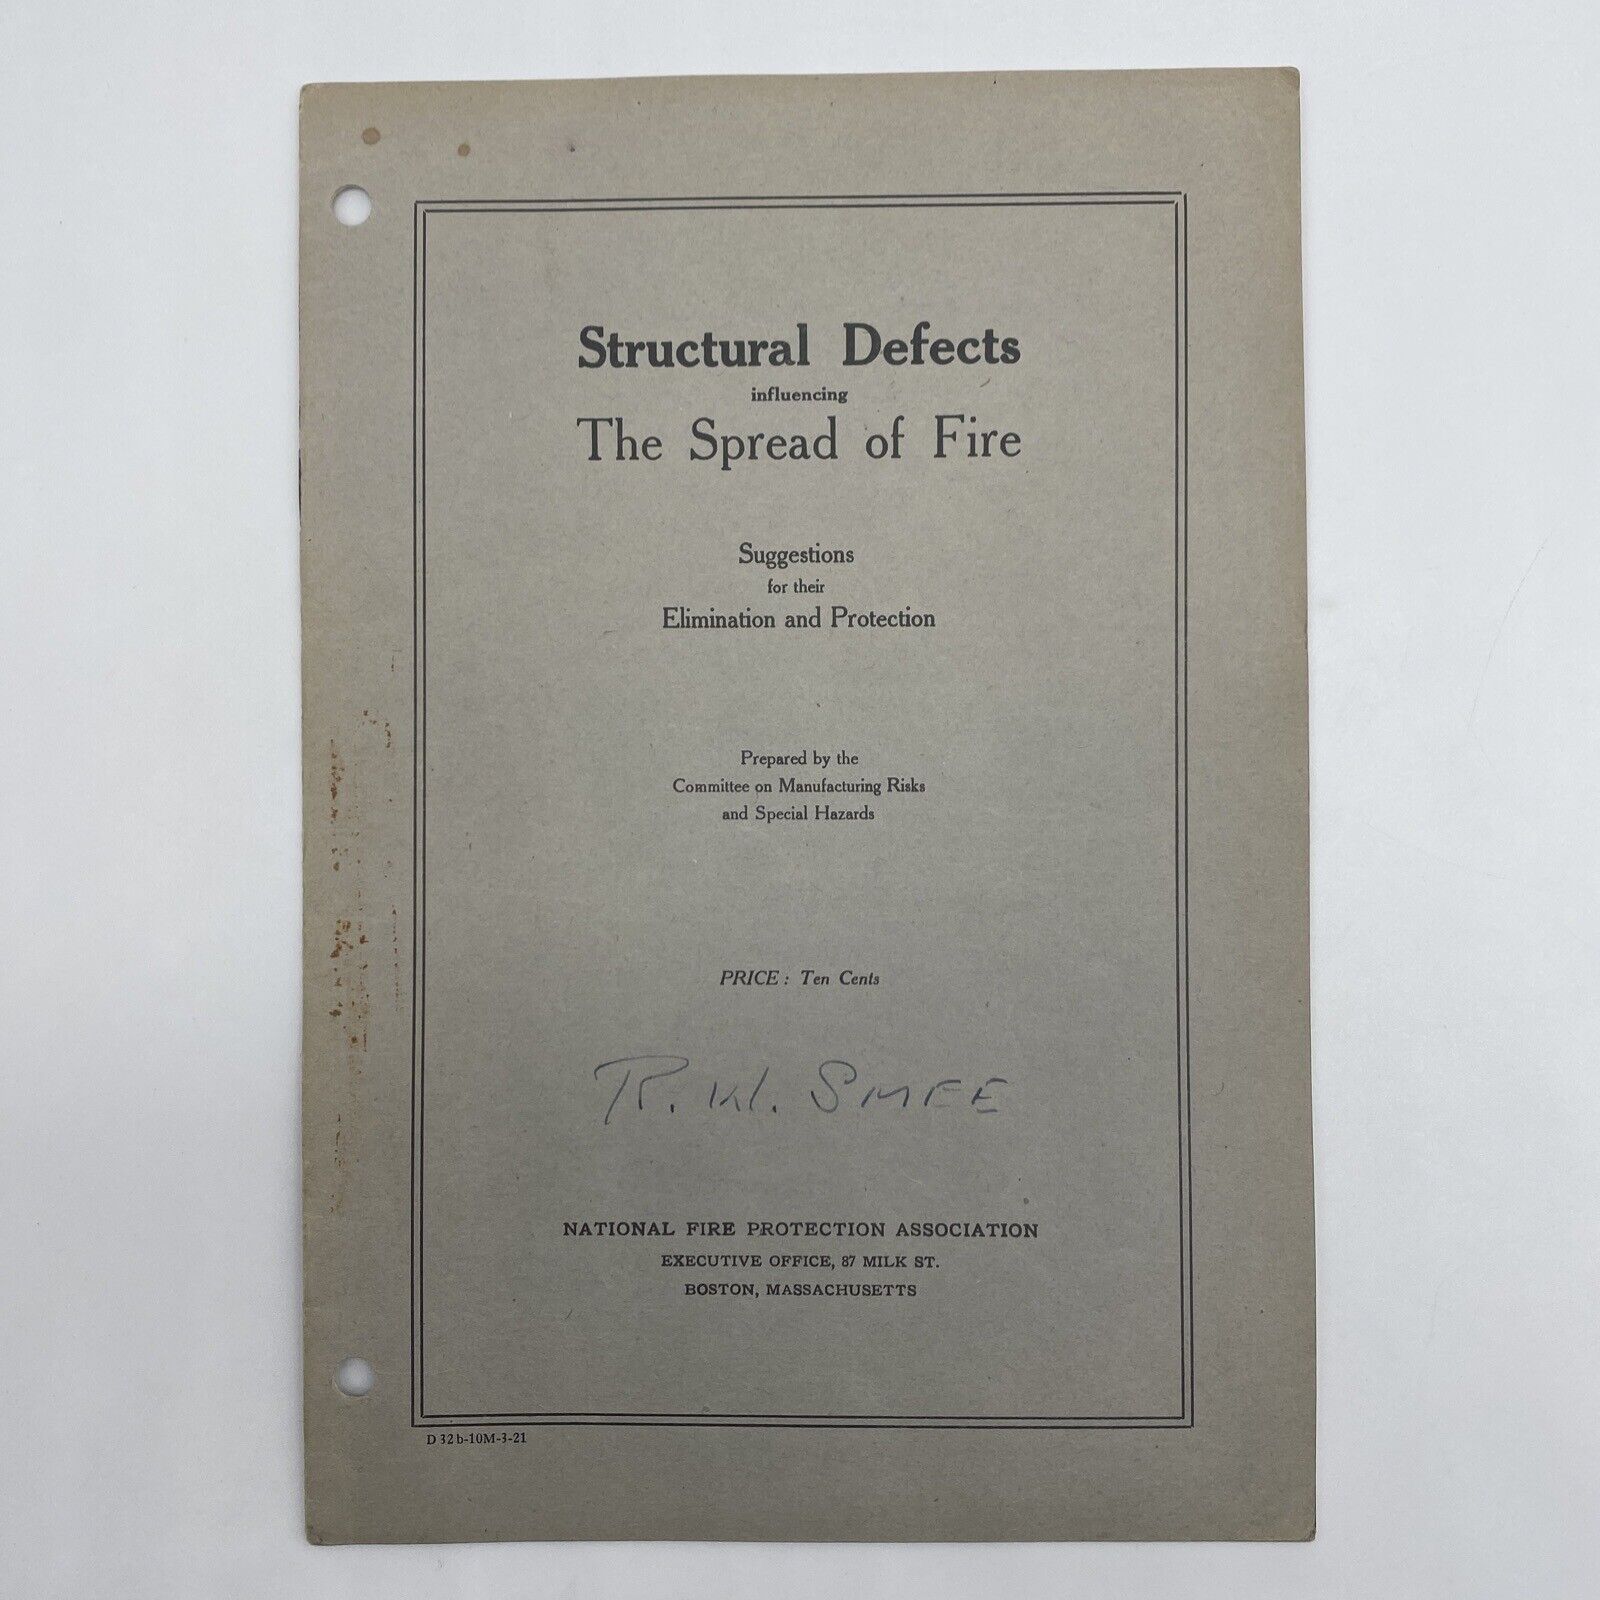 NFPA 1921 Structural Defects Influencing The Spread Of Fire Antique Guidebook